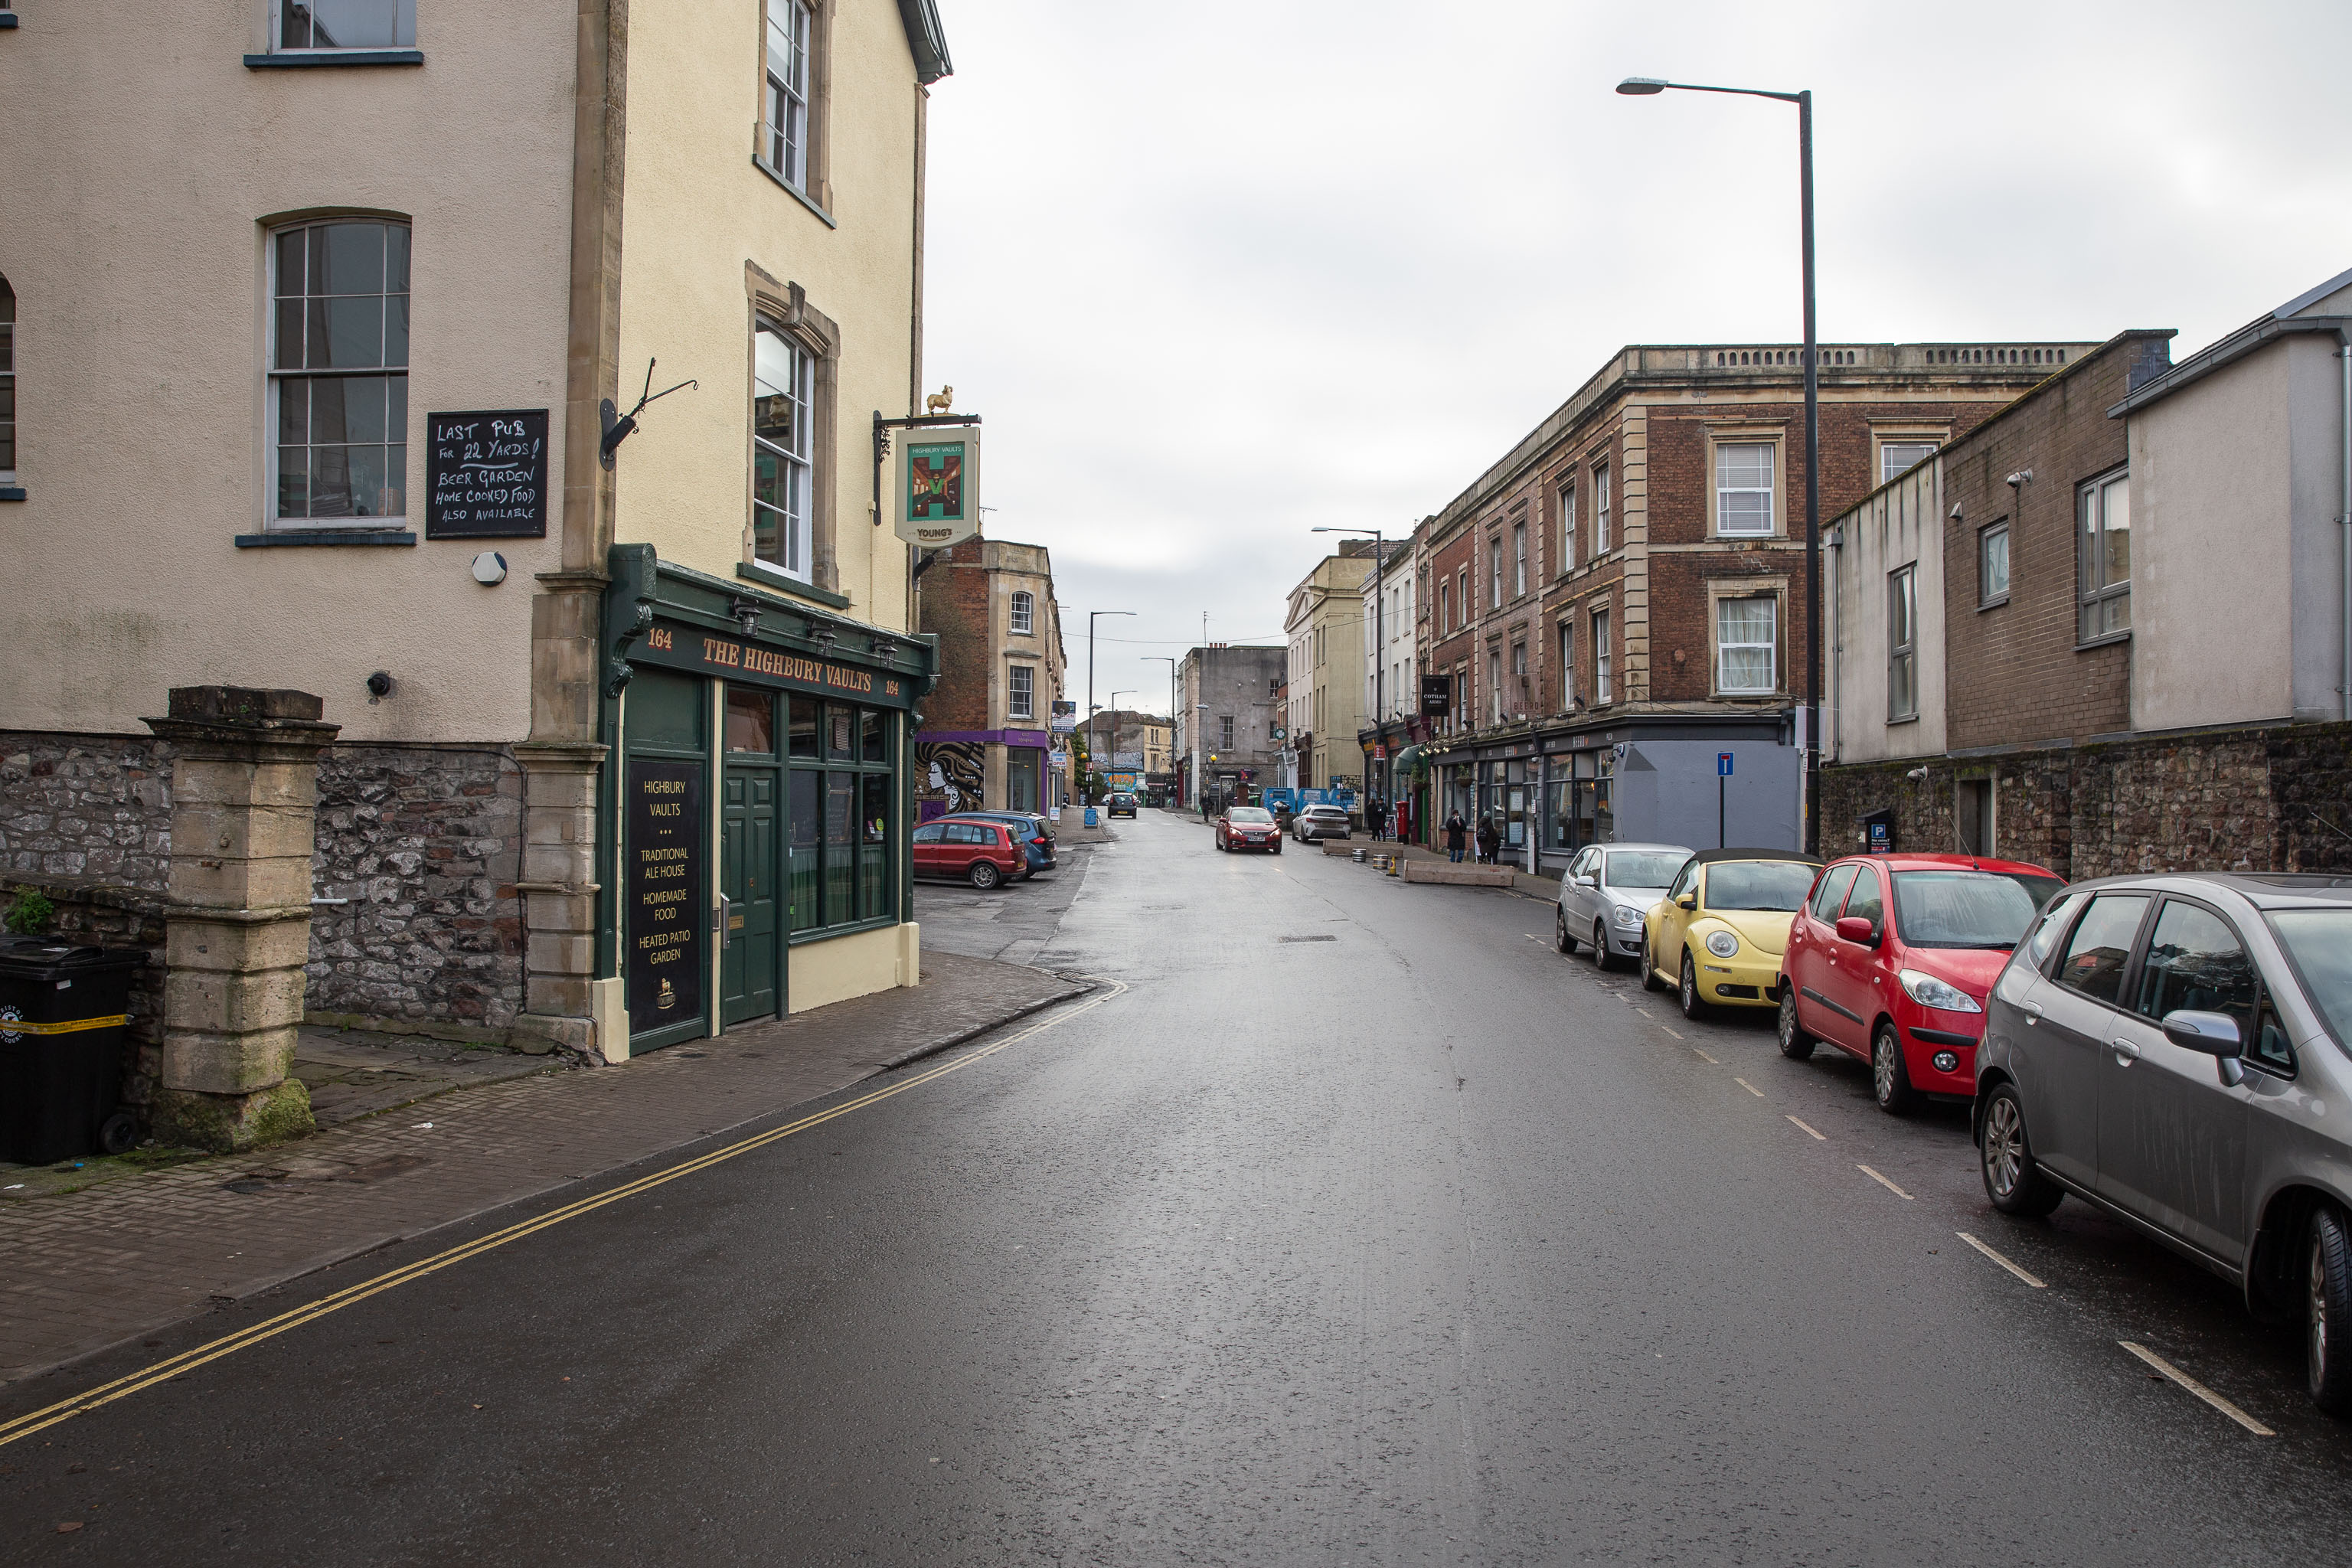 Saint Michael's Hill
I don't visit St. Michael's Hill very often these days, but I used to enjoy the electic collection of shops. Not too fond of the current select—I d...